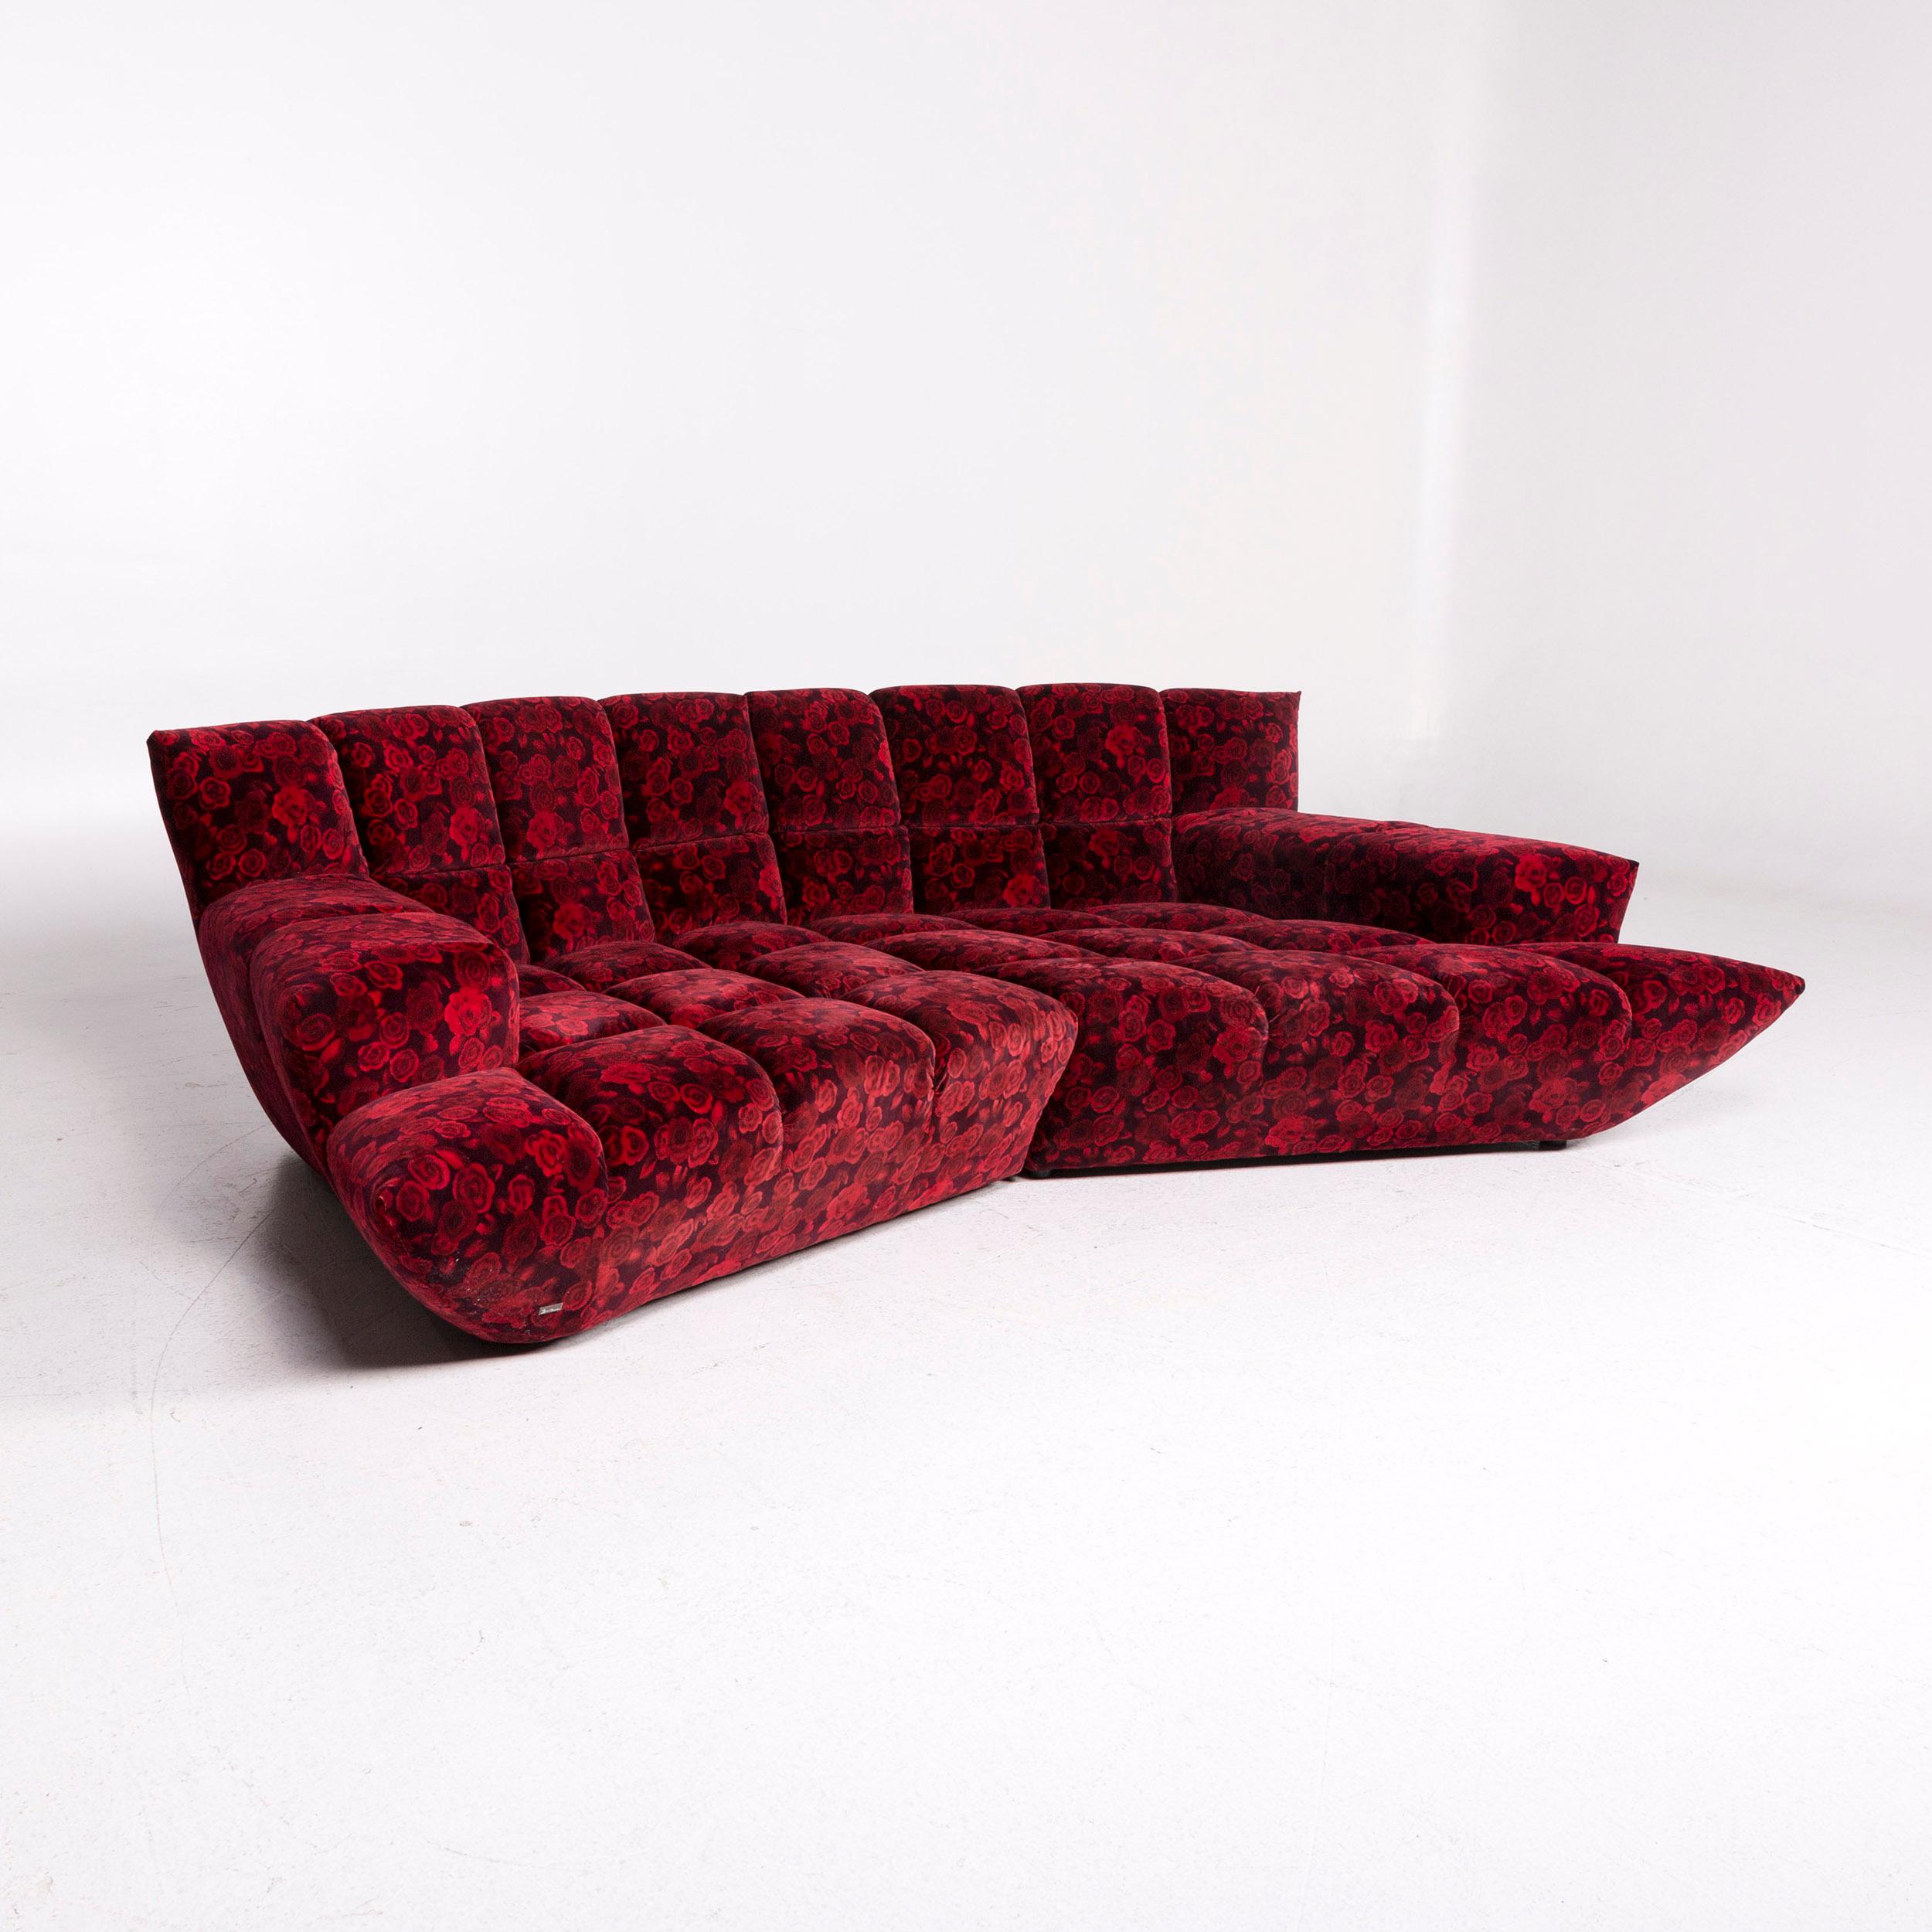 We bring to you a Bretz cloud 7 velvet fabric corner sofa red sofa rose pattern.

 

 Product measurements in centimeters:
 

Depth 133
Width 250
Height 80
Seat-height 39
Rest-height 54
Seat-depth 64
Seat-width 184
Back-height 42.